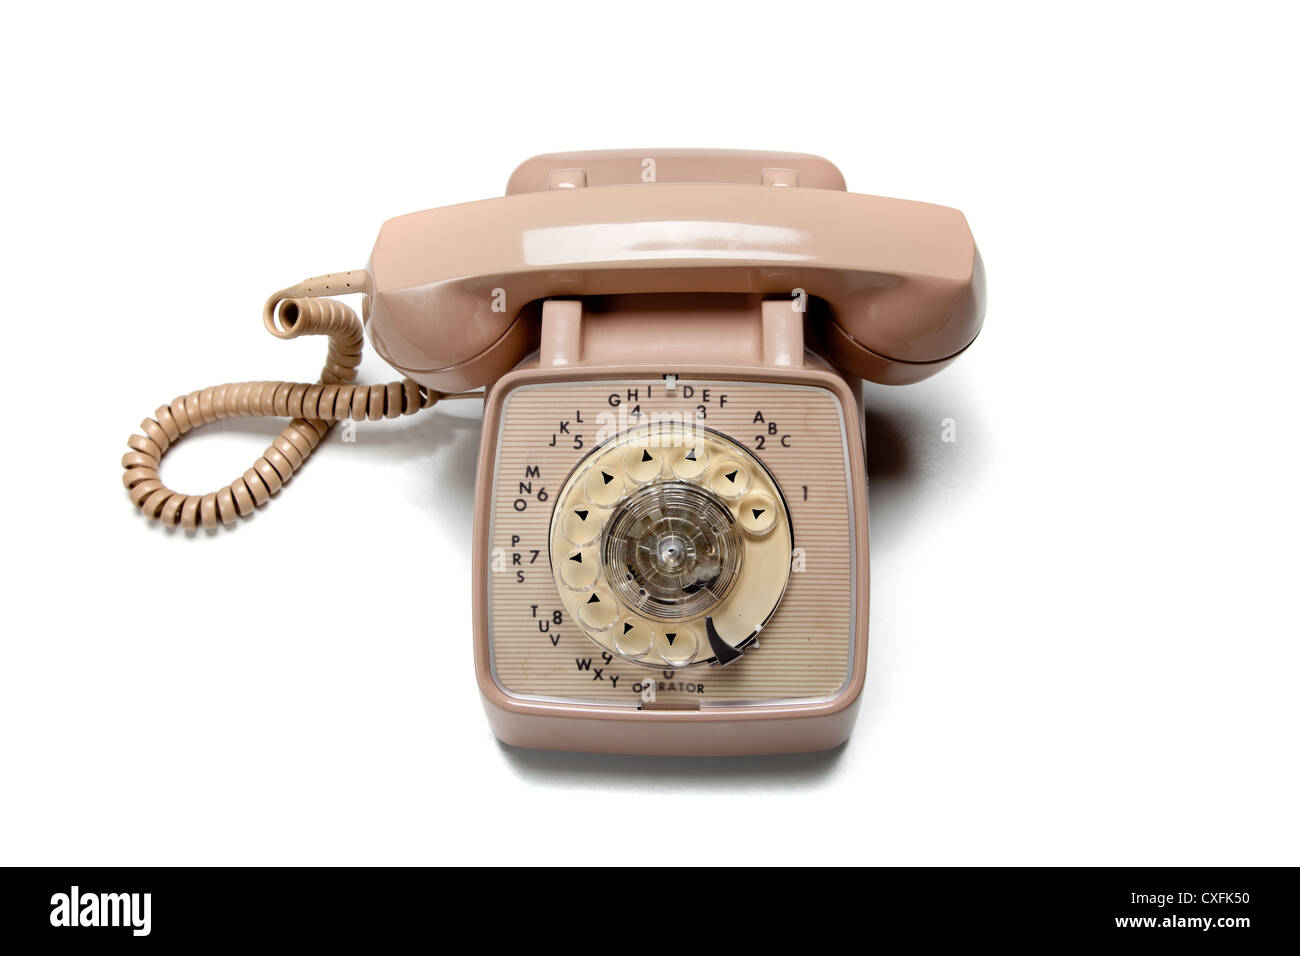 Vintage beige rotary phone on a white background Stock Photo